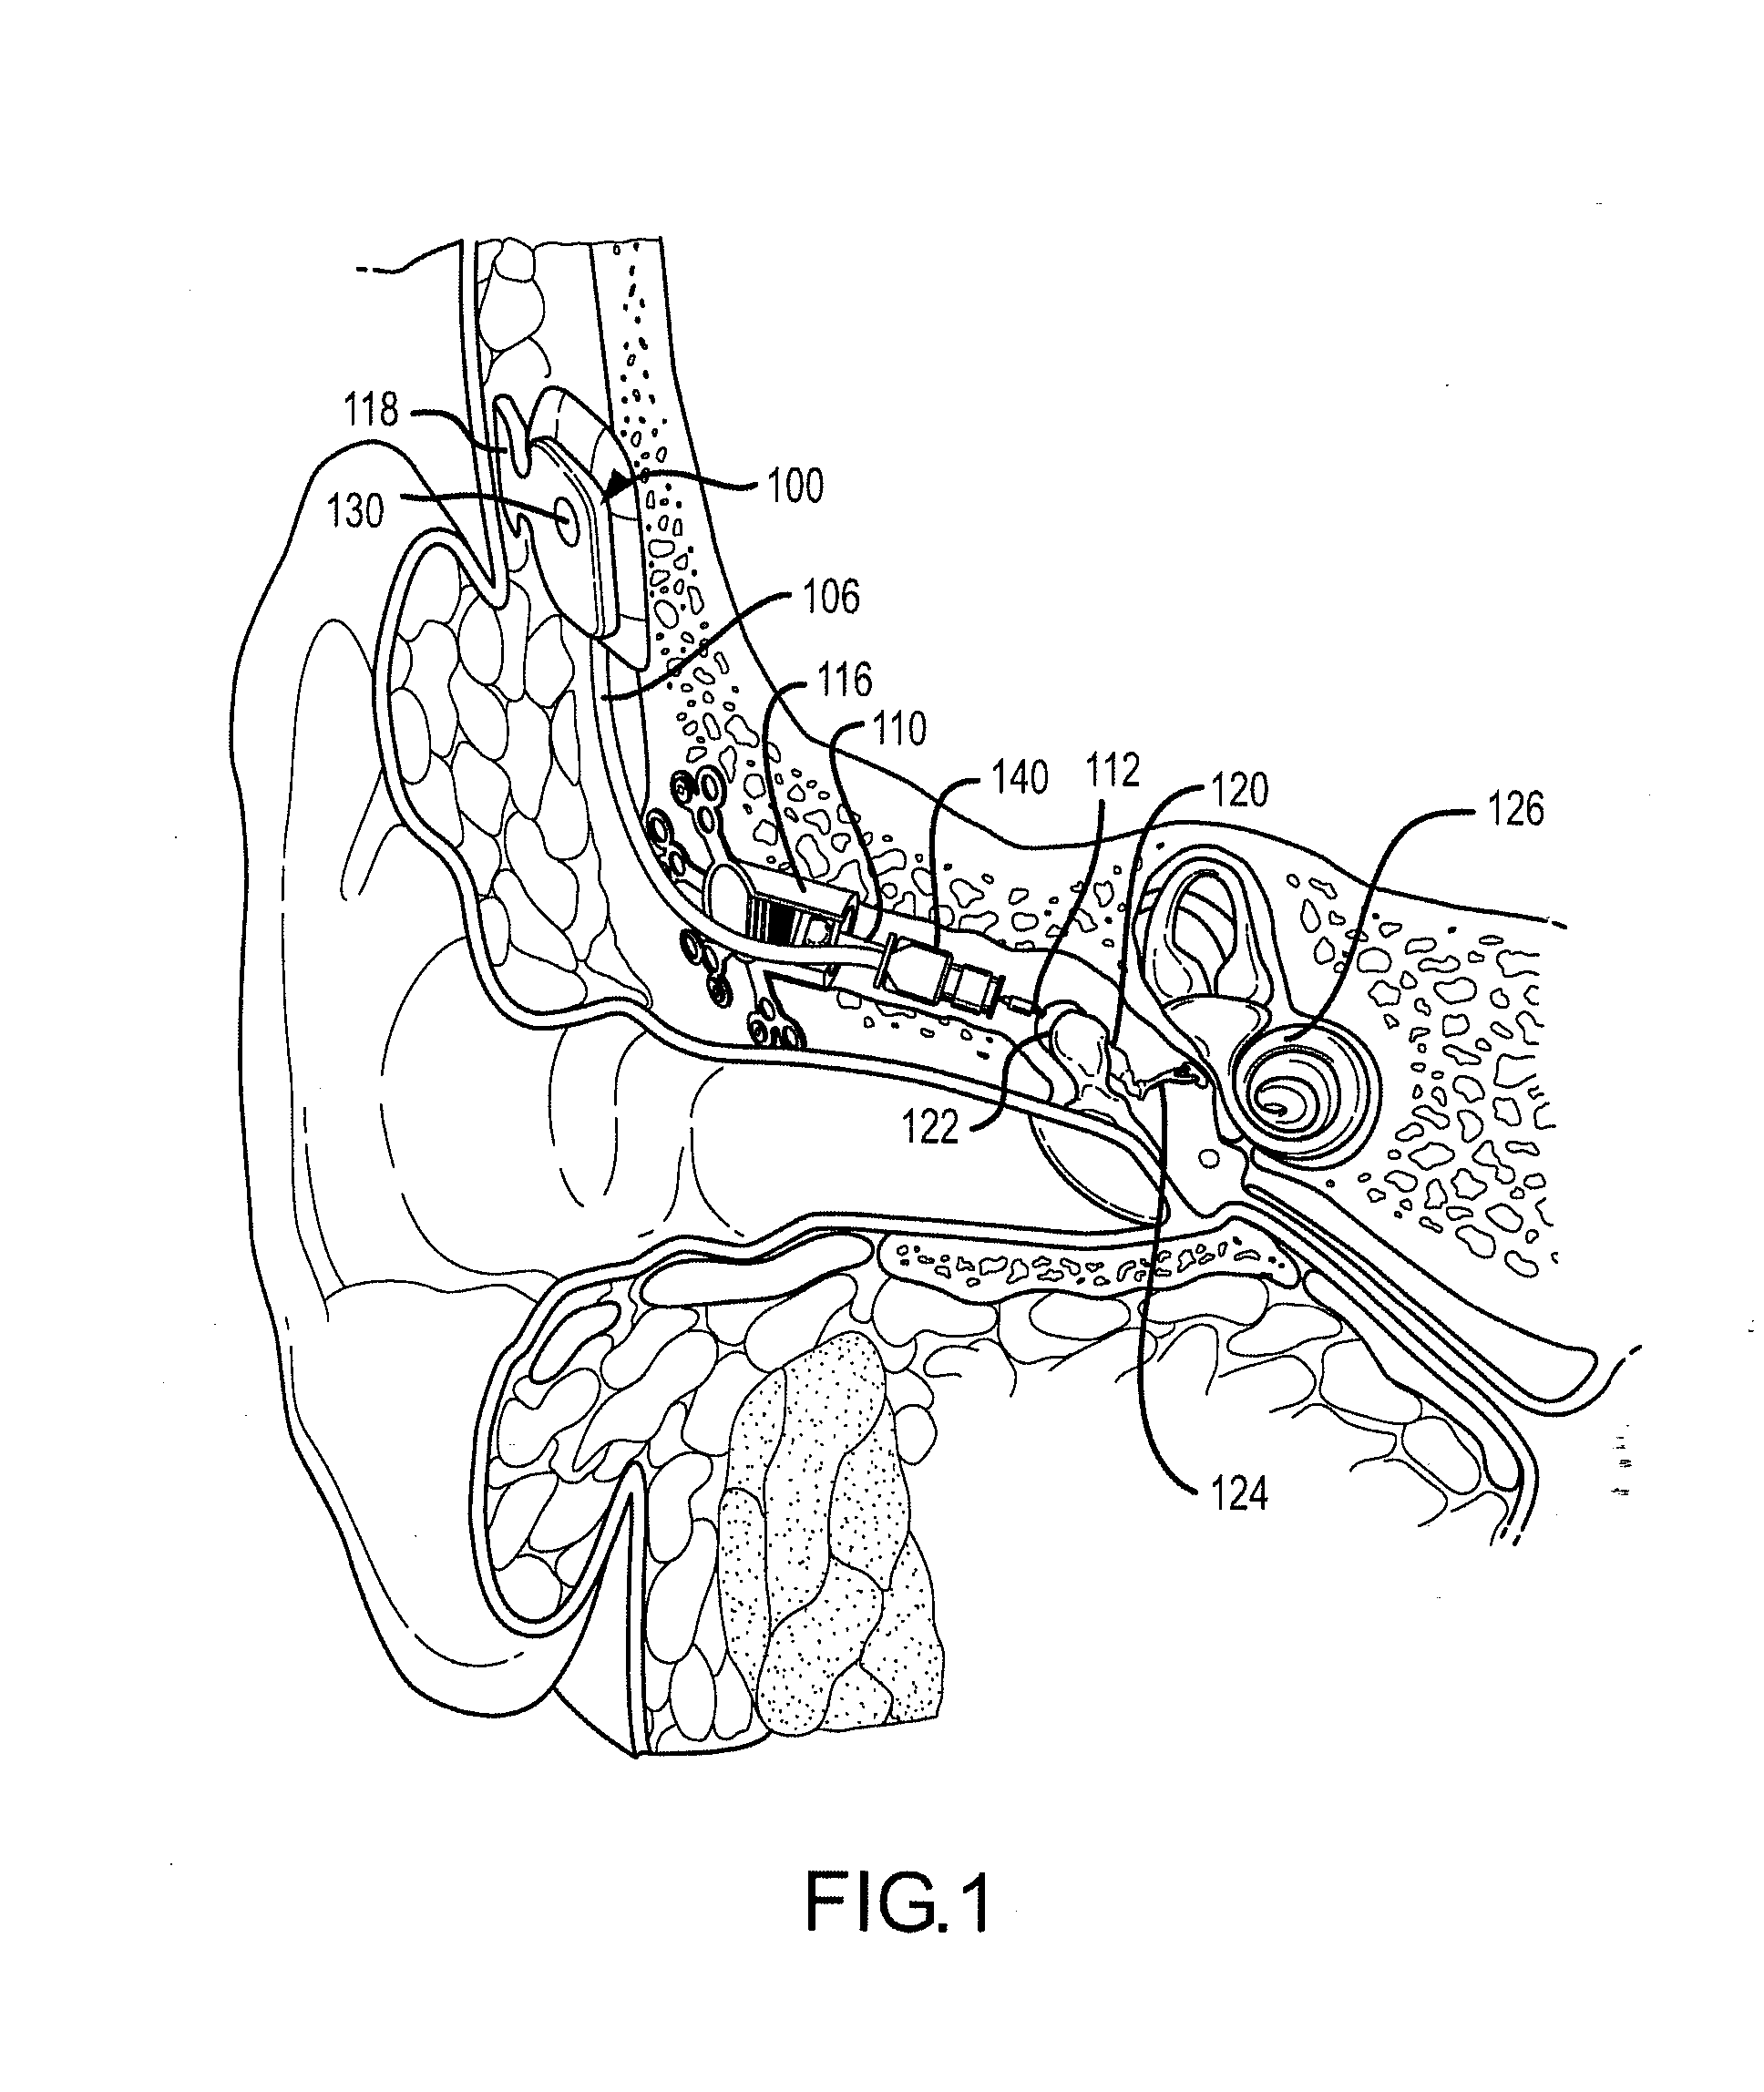 Compressive coupling of an implantable hearing aid actuator to an auditory component